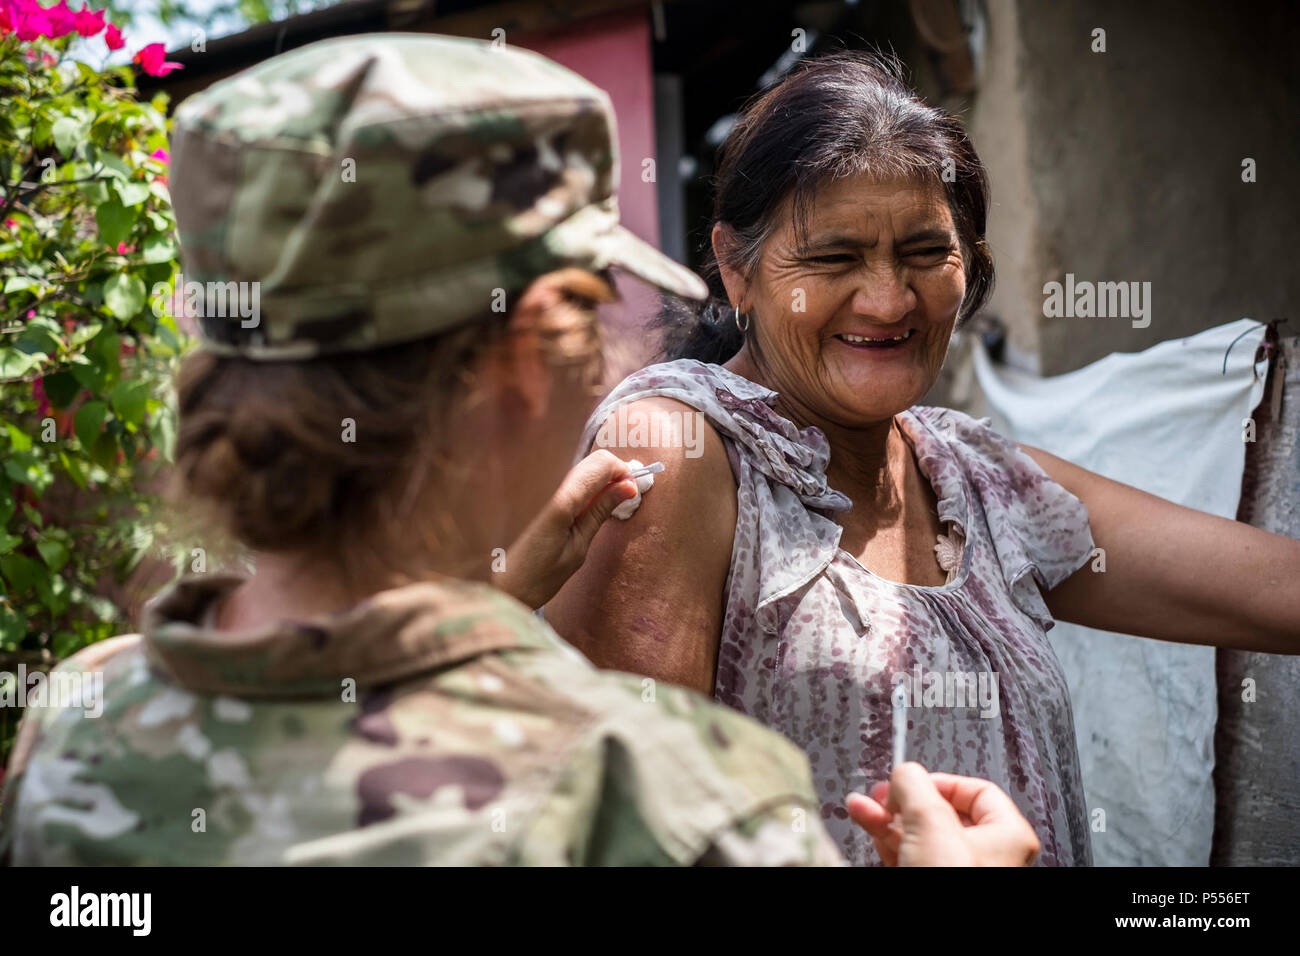 U.S. Army Lt. Col. Rhonda Dyer, Joint Task Force - Bravo, gives a vaccine to a local Honduran while out on a Community Health Nurse mission in Comayagua, Honduras, May 10, 2017. The CHM is a weekly partnership with the staff at Jose Ochoa Public Health Clinic, administering vaccines, Vitamins, deworming medication and other medical supplies to over 180 Hondurans around the Comayagua area on May 10, 2017. Stock Photo